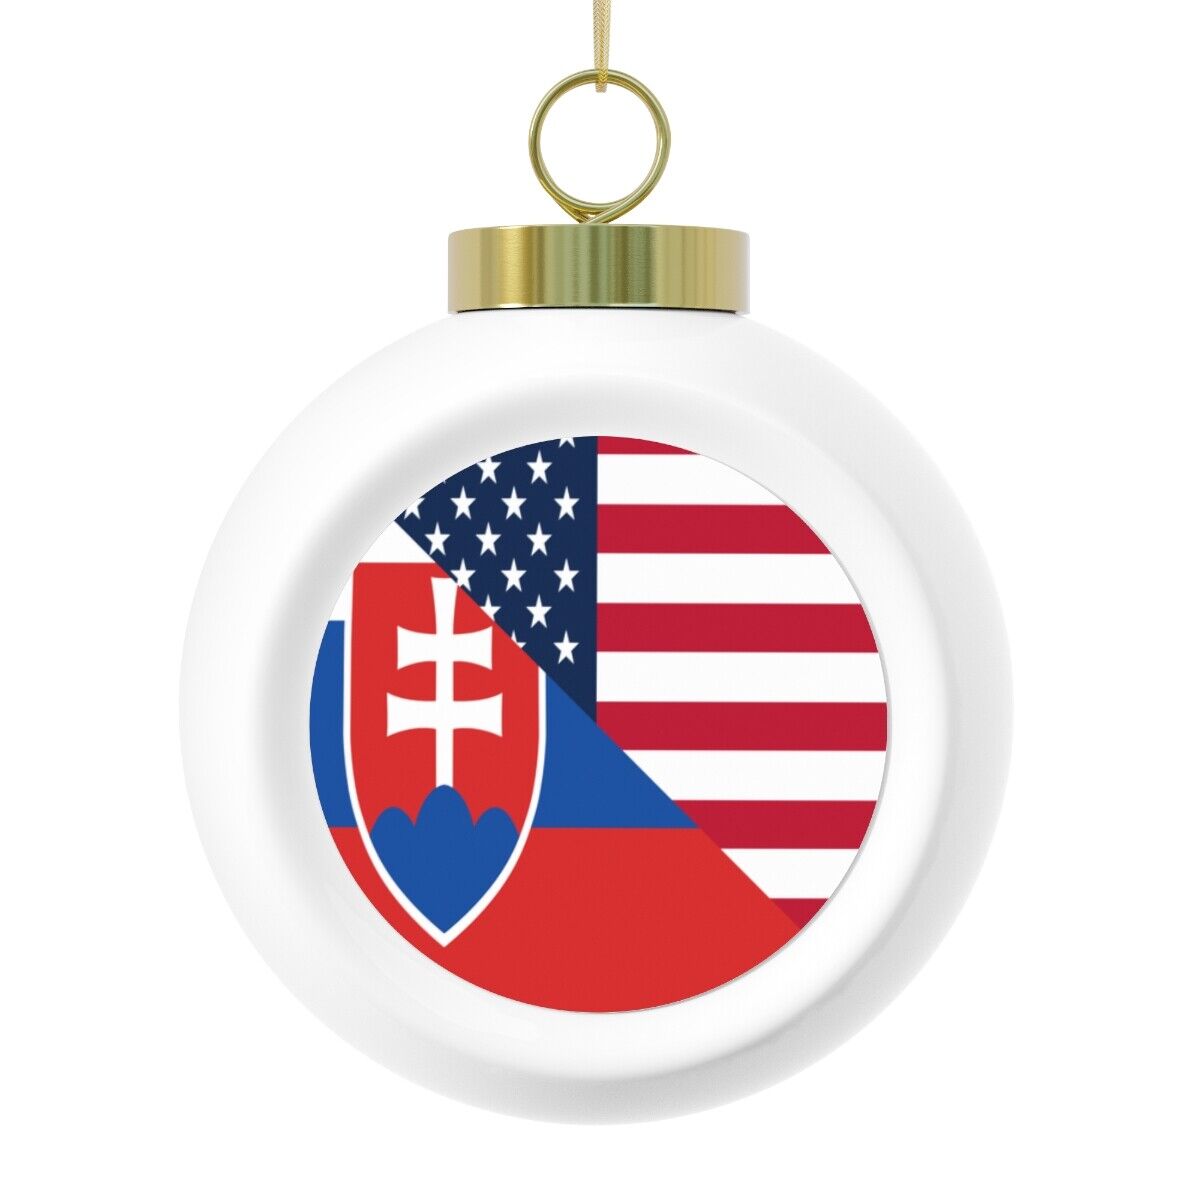 A Tale of Two Christmases: Contrasting Slovakian and American Holiday Traditions